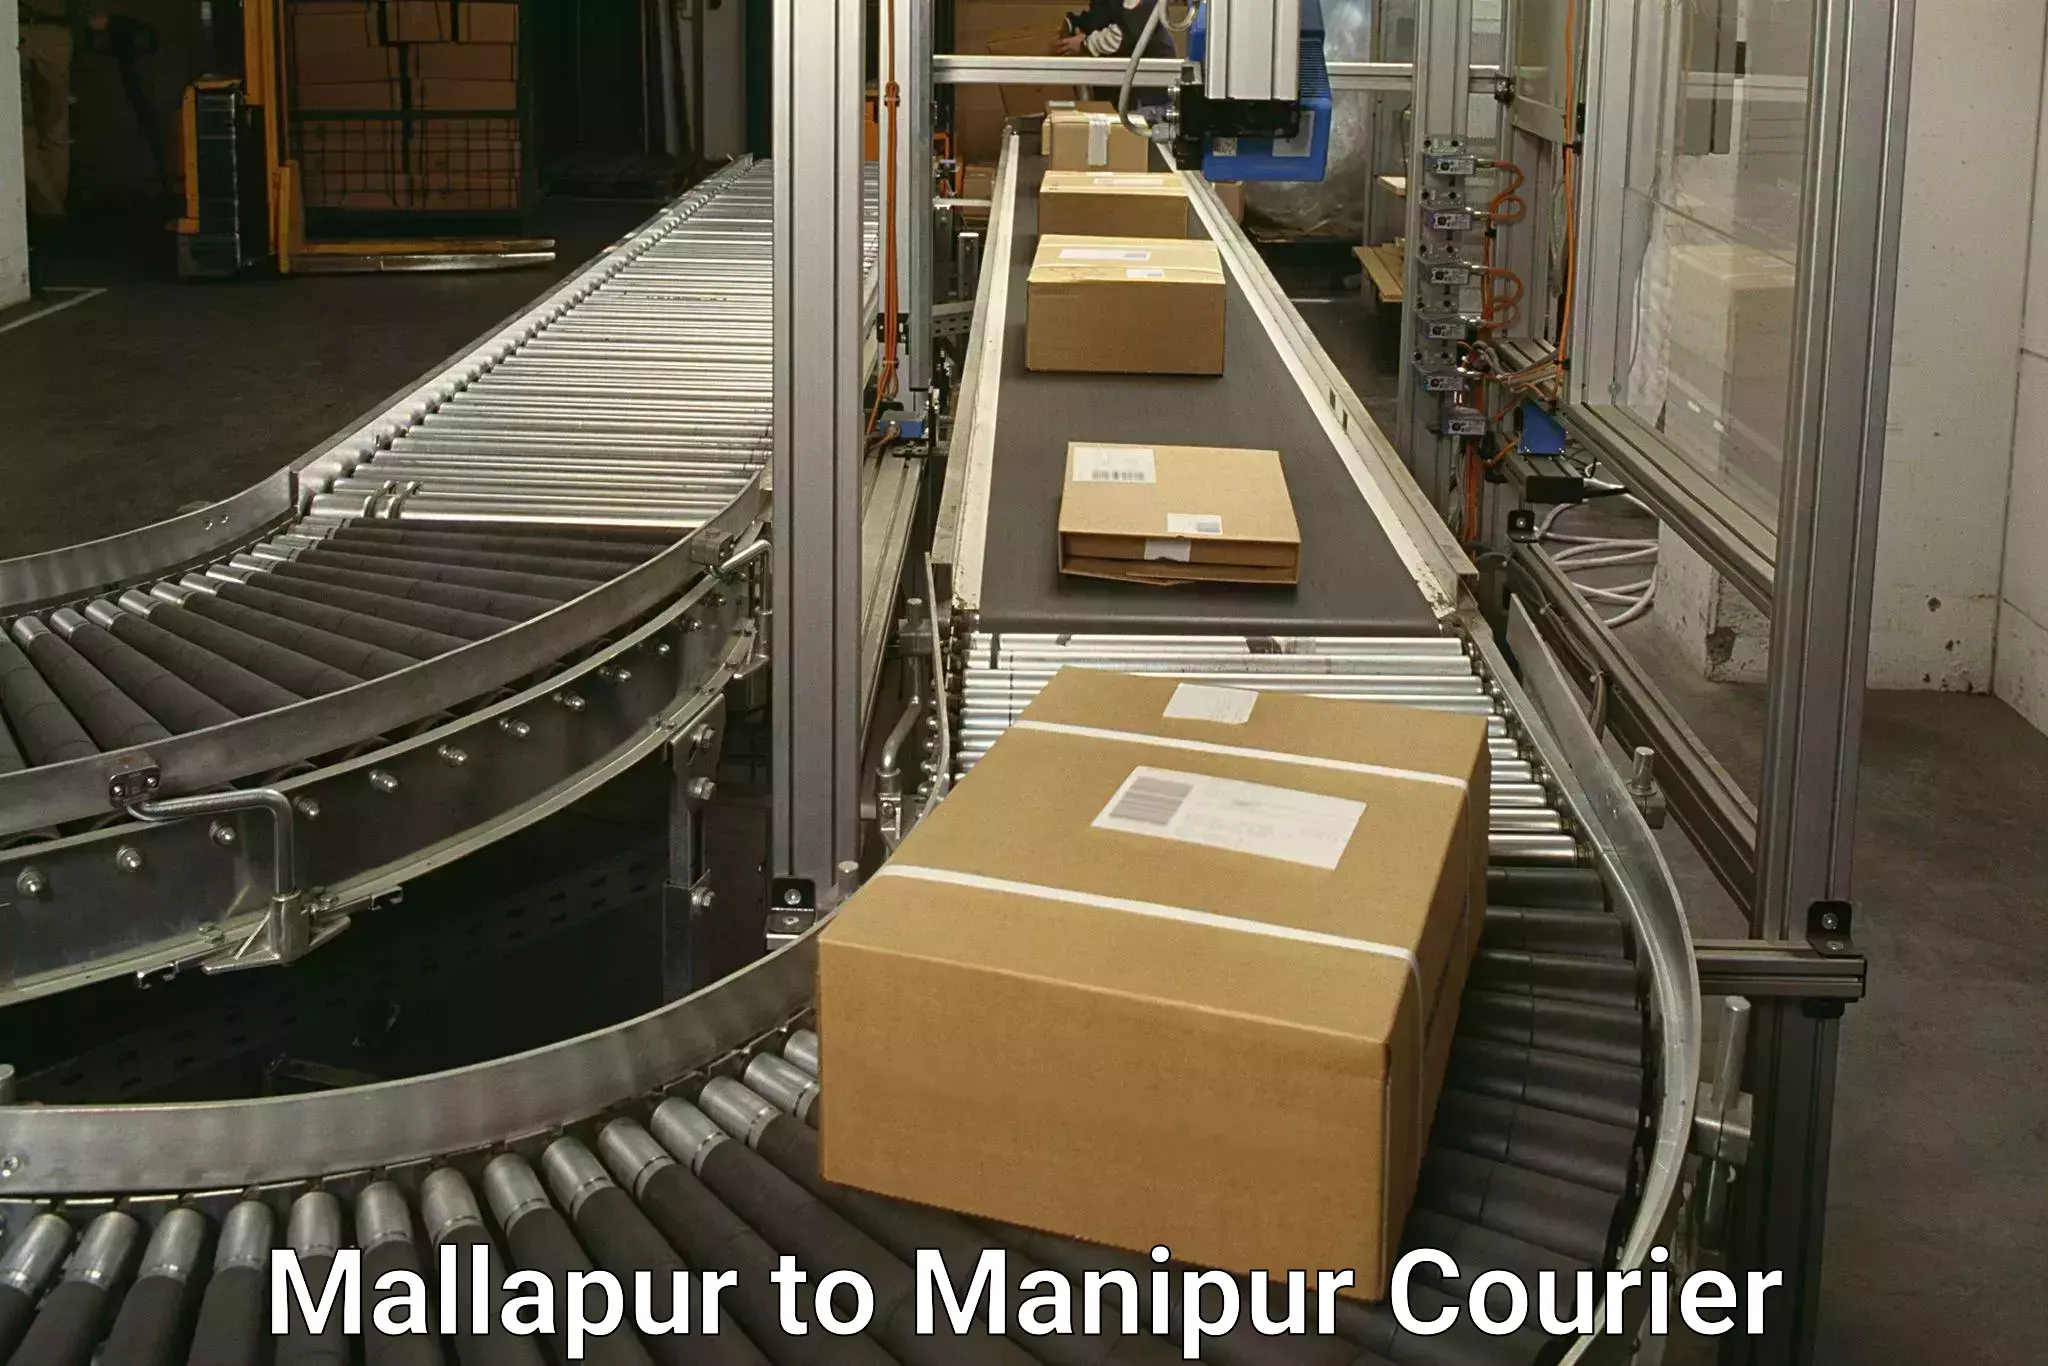 State-of-the-art courier technology Mallapur to Manipur